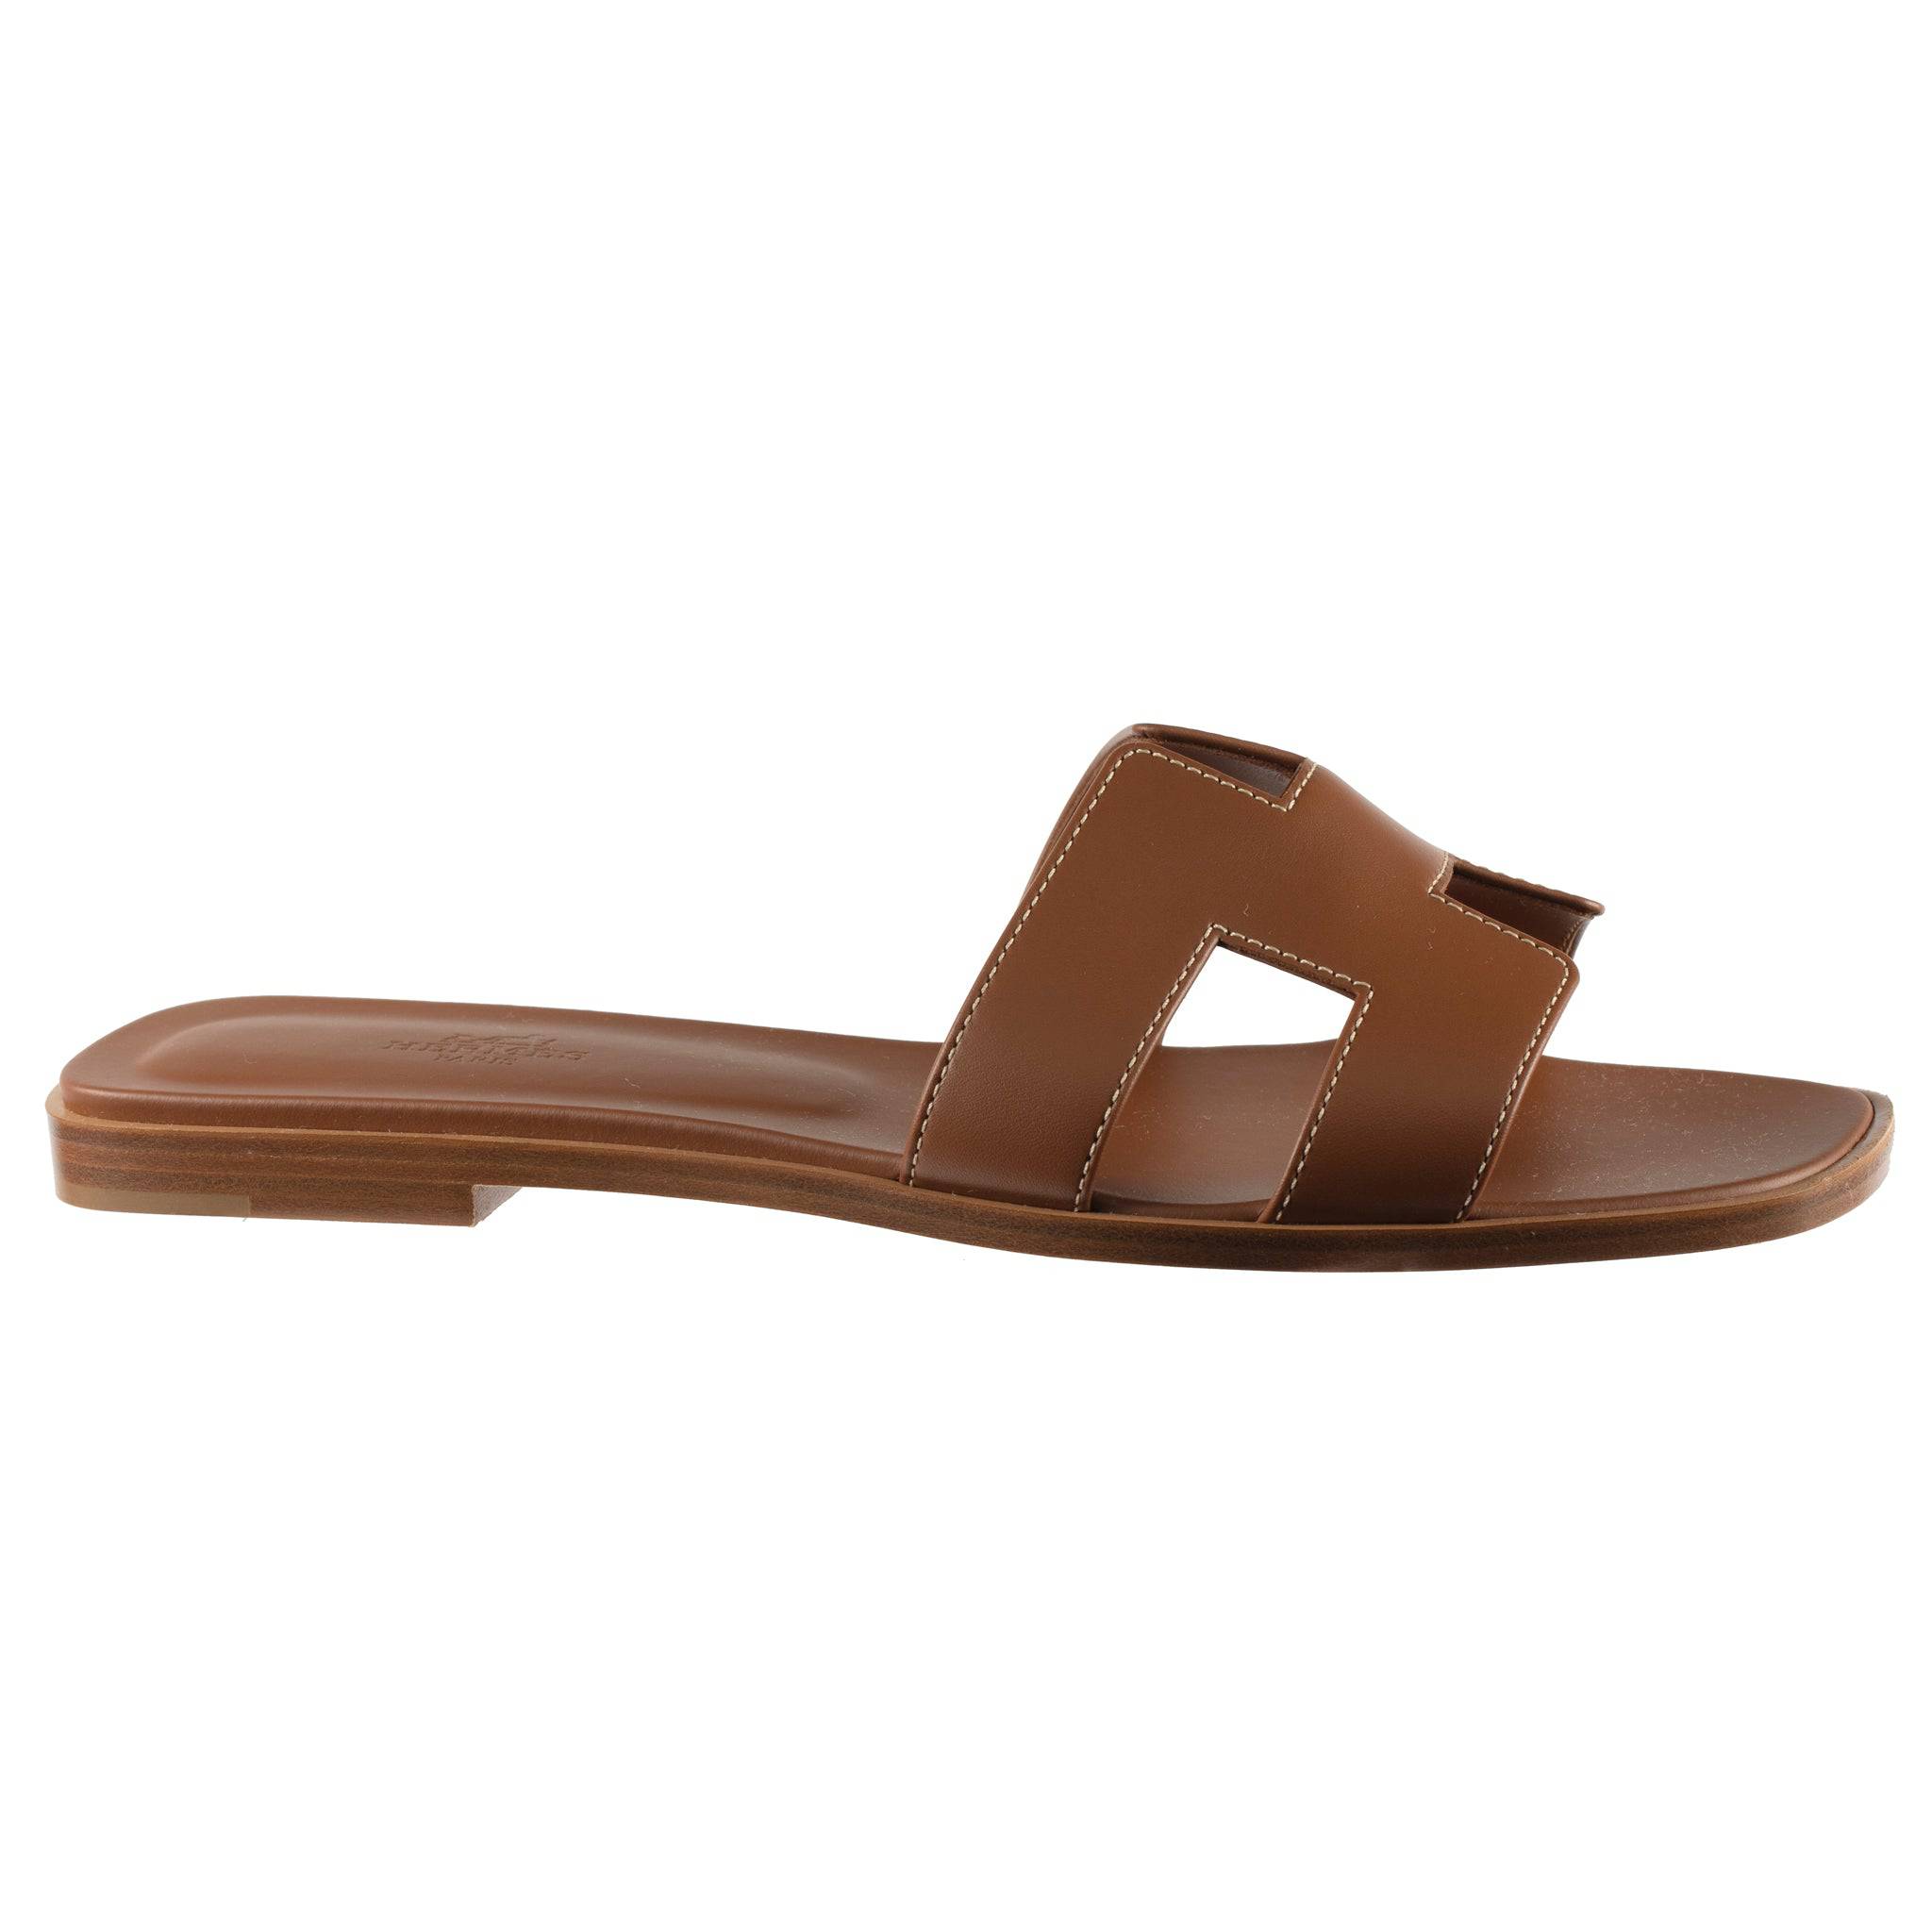 HERMES ORAN SANDAL GOLD SMOOTH LEATHER - On Repeat